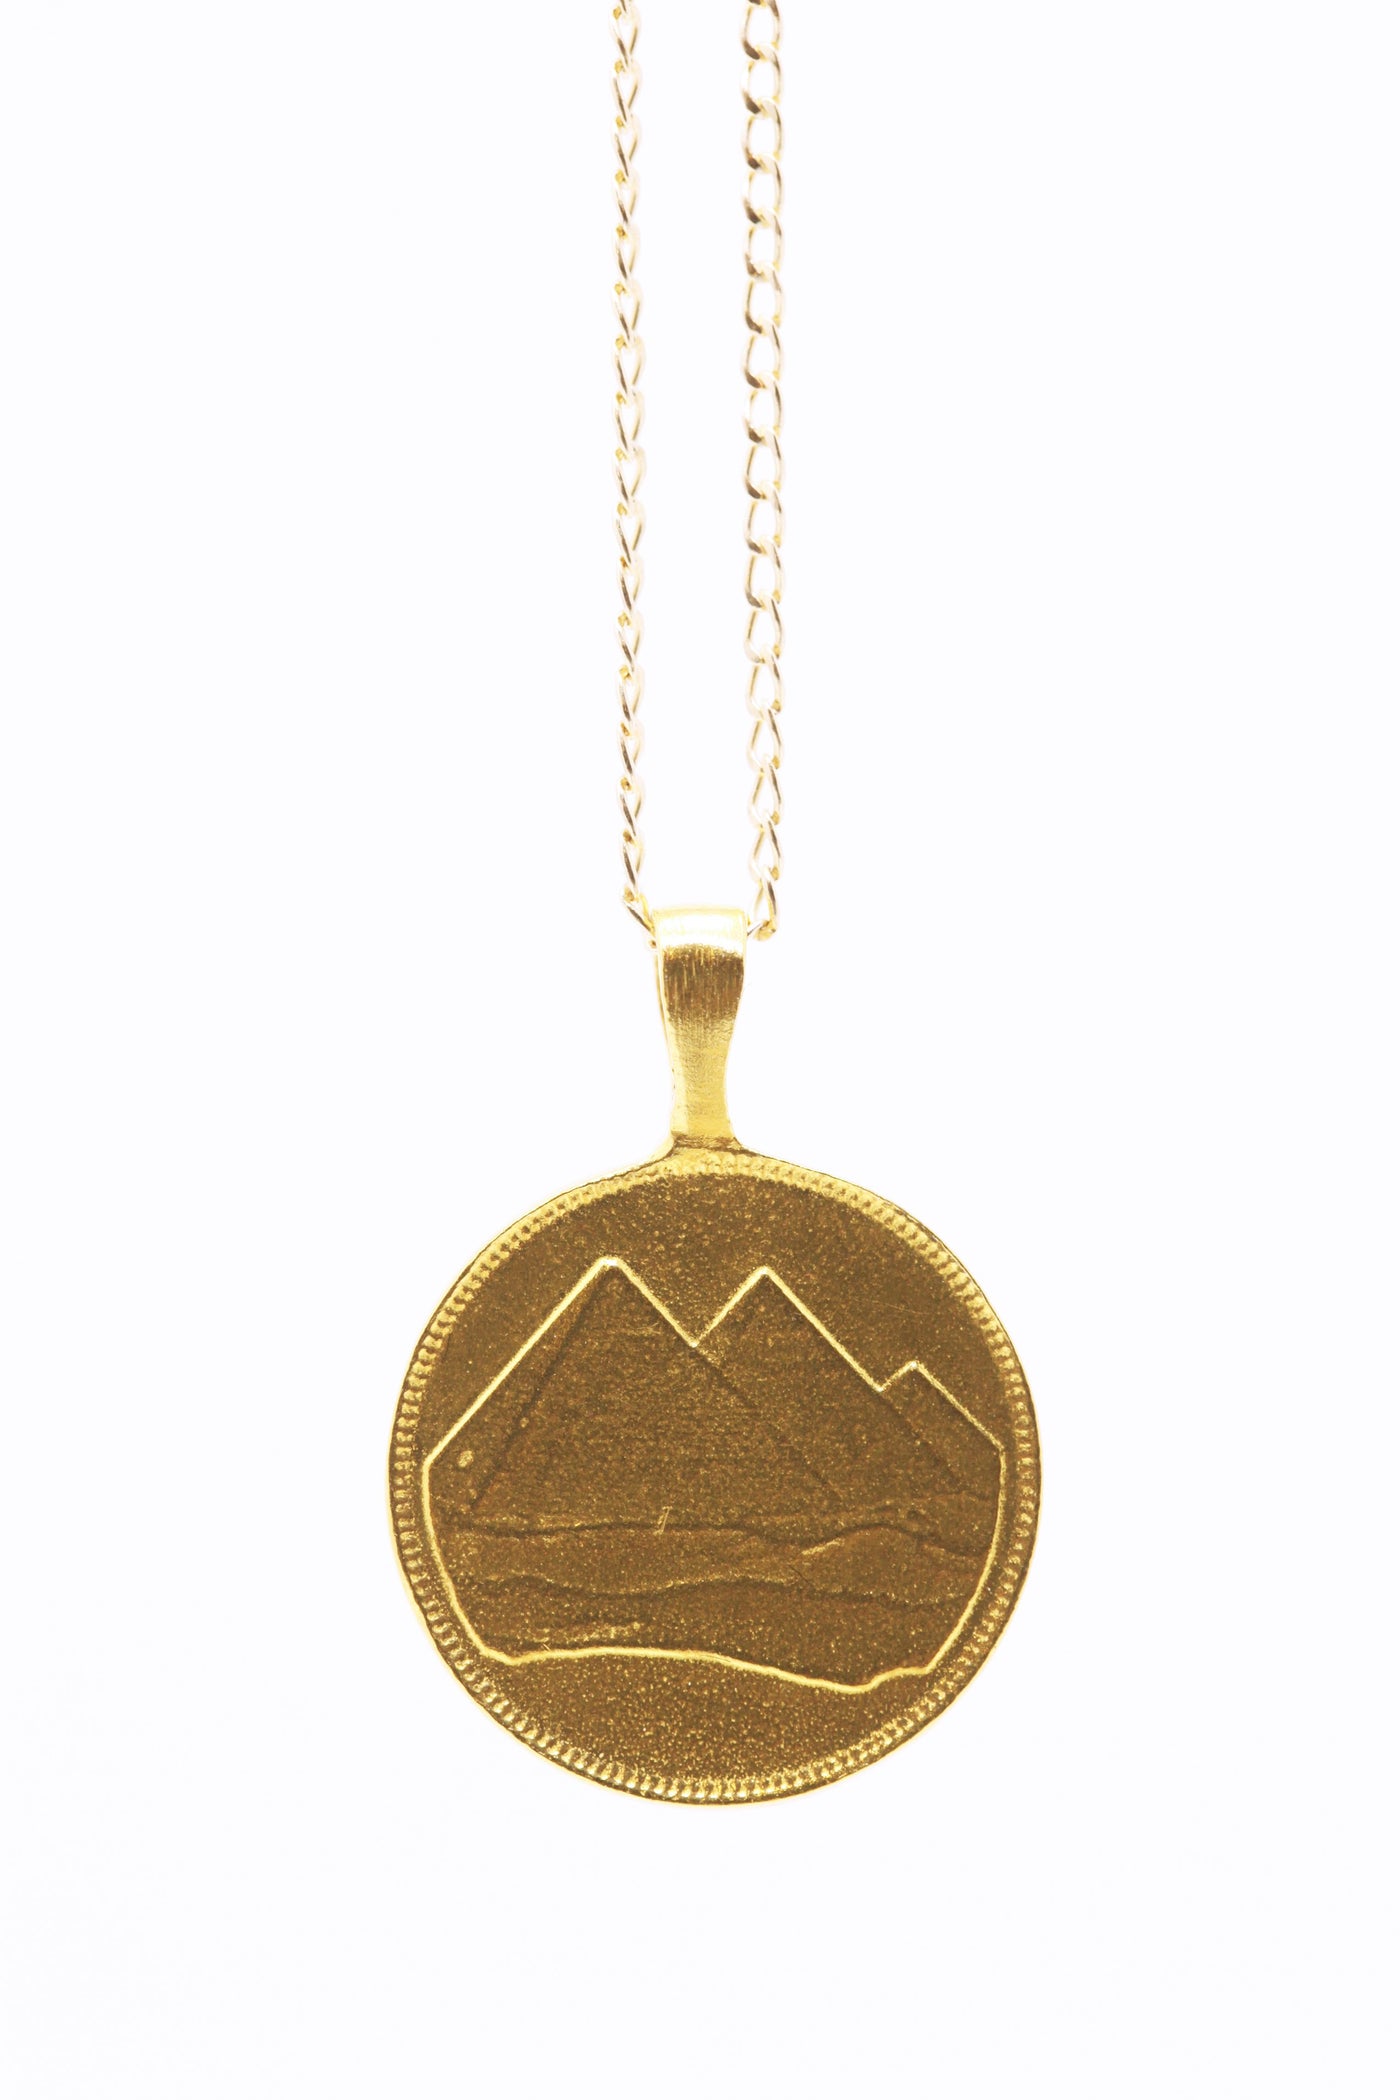 THE PYRAMID Coin Necklace - ShopAuthentique